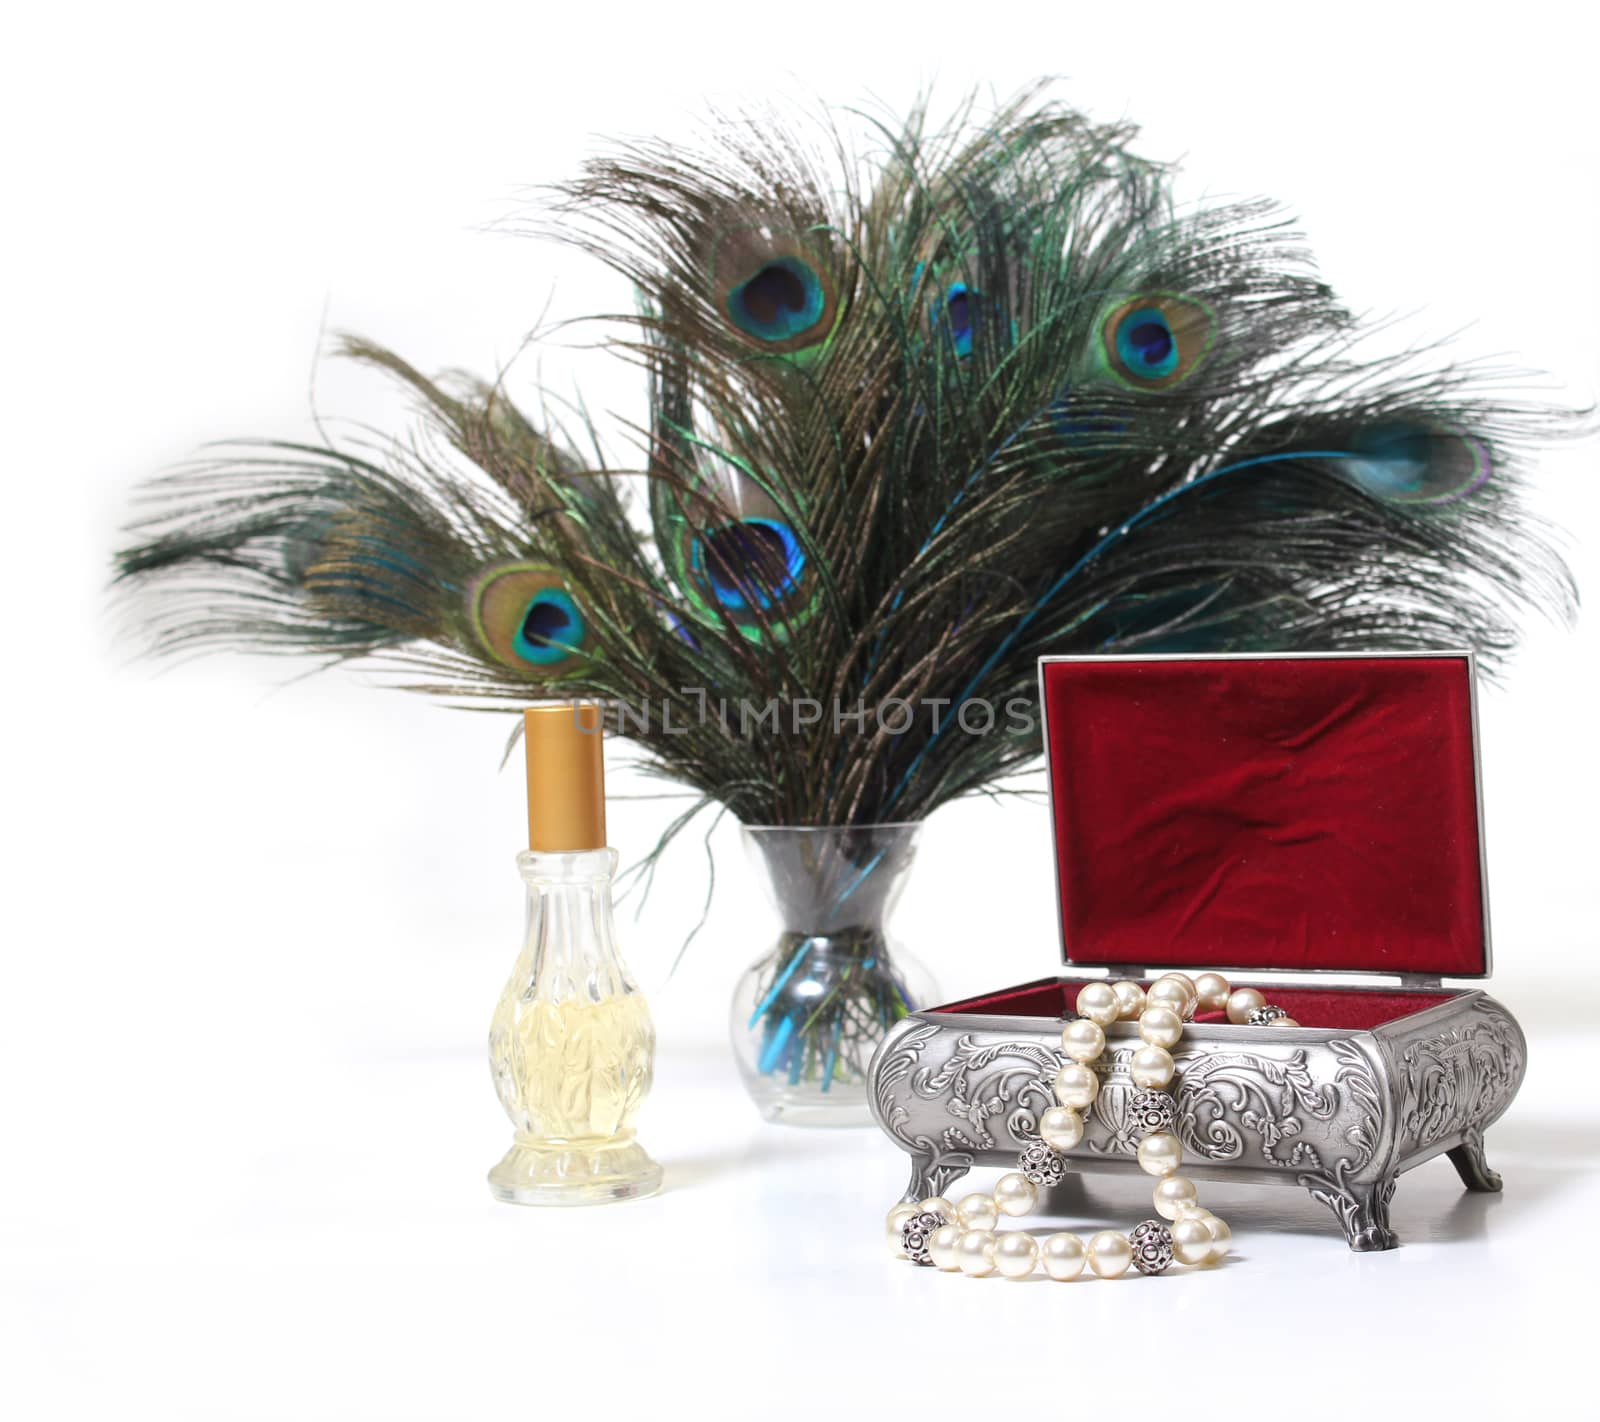 Vintage Jewelry Box With Pearls and Peacock Feathers